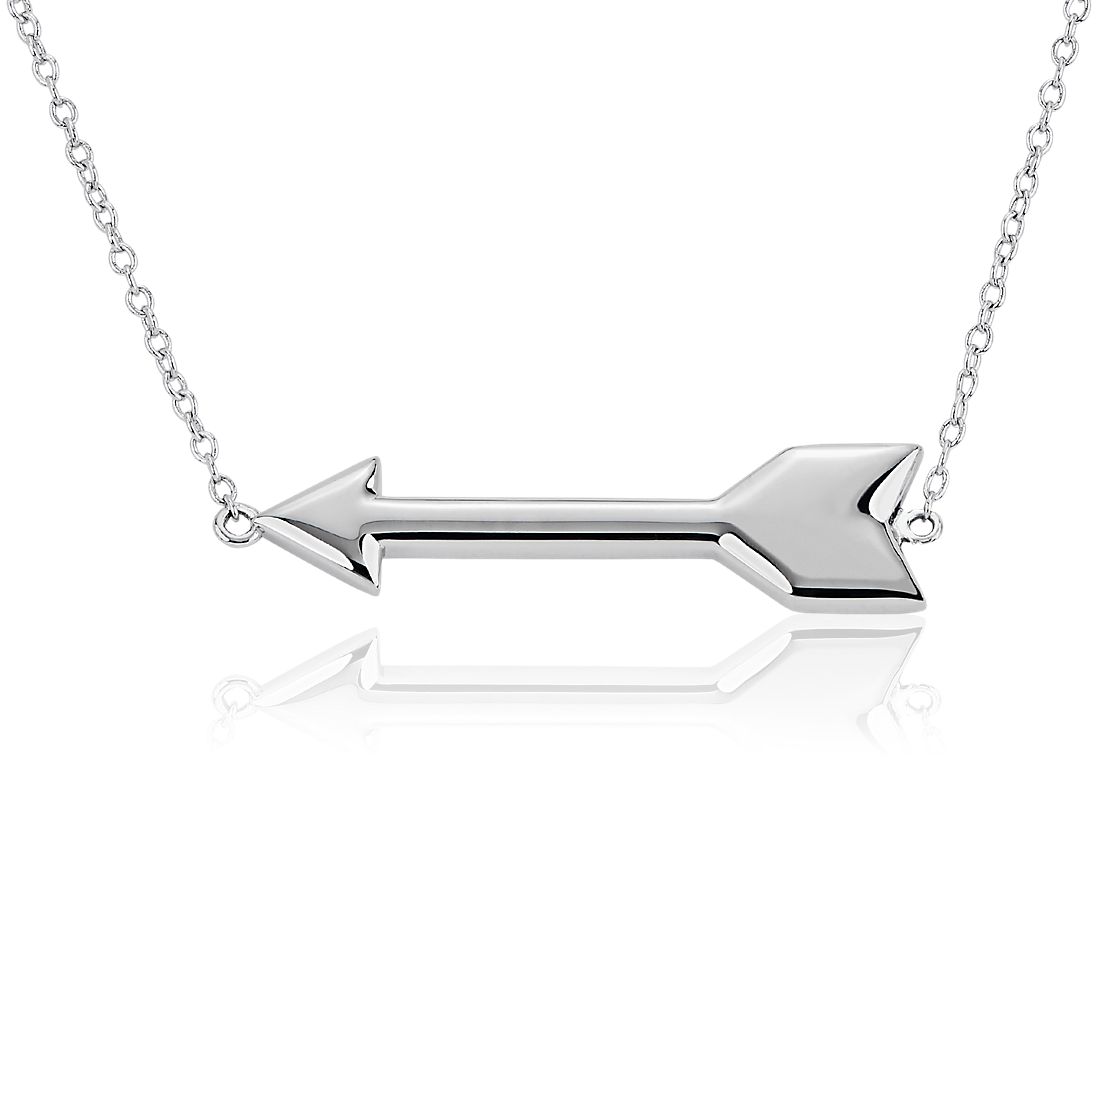 Arrow Small arrow necklace Arrow necklace for woman in Sterling silver Silver chain necklace women